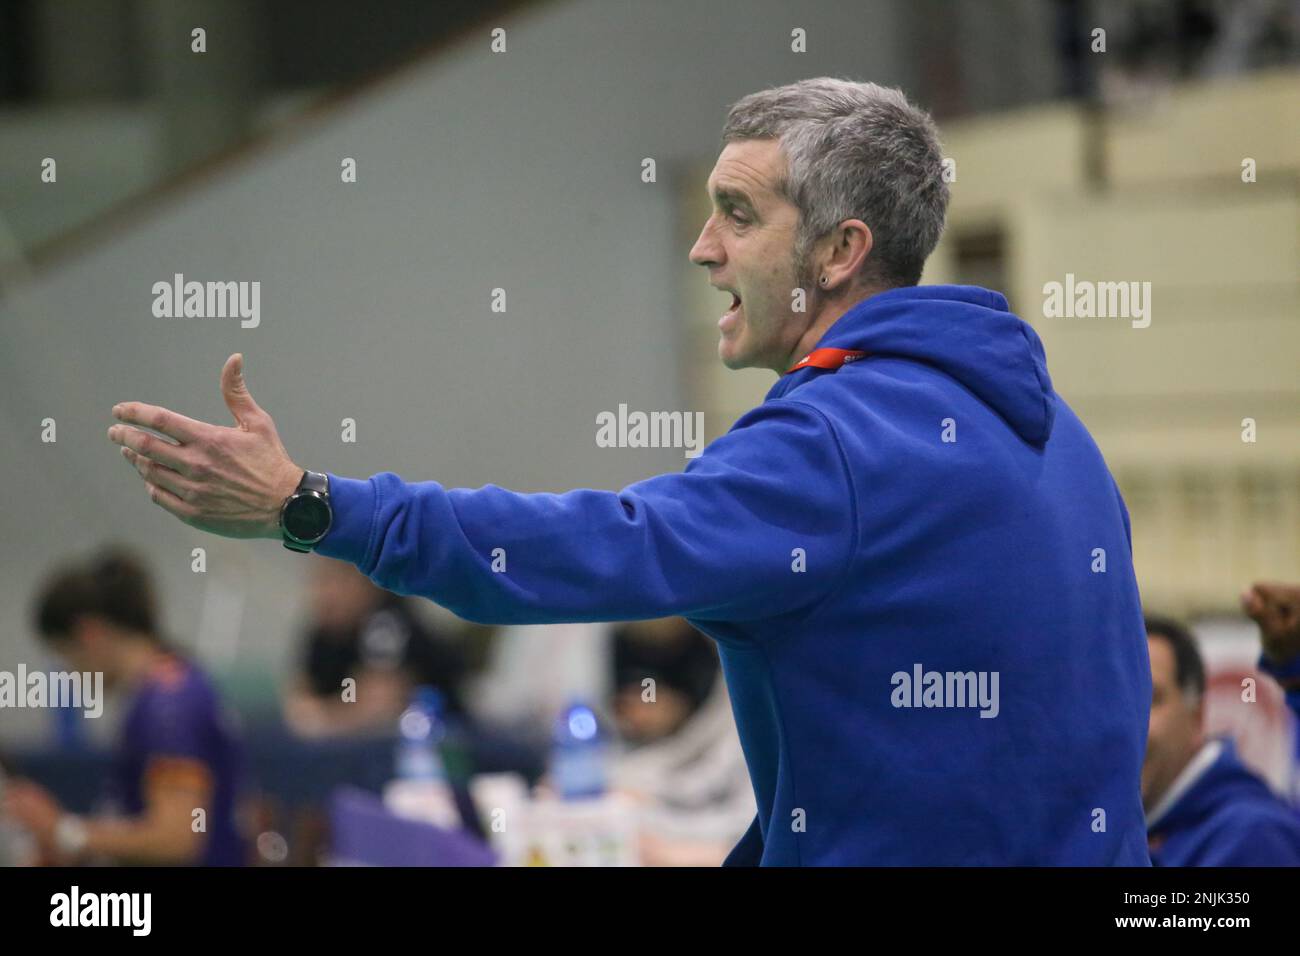 Gijon, Spain. 22nd Feb, 2023. Gijon, SPAIN: The coach of Super Amara Bera Bera, Imanol Alvarez makes indications during the 16th day of the Iberdrola League 2022-23 between Motive.co Gijon and Super Amara Bera Bera with defeat of the locals by 23-35 on February 22, 2023, at the La Arena Sports Pavilion in Gijon, (Photo by Alberto Brevers/Pacific Press) Credit: Pacific Press Media Production Corp./Alamy Live News Stock Photo